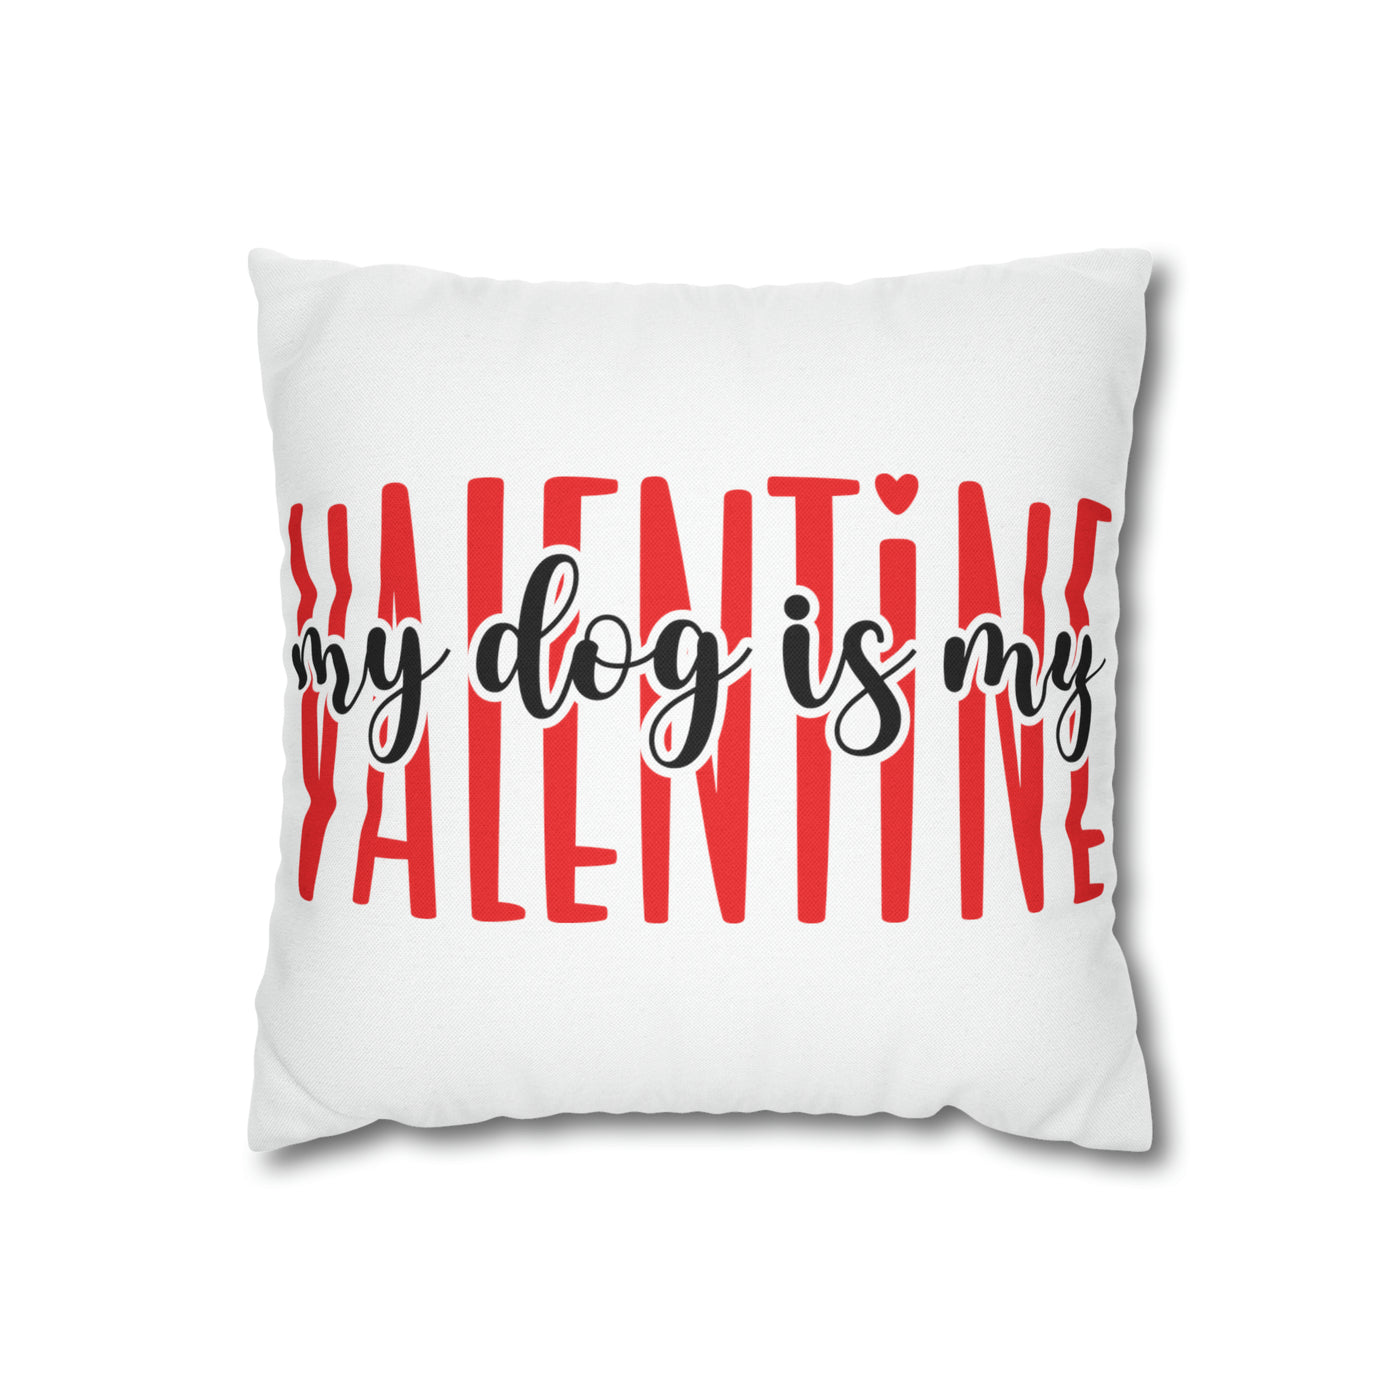 My Dog Is My Valentine Version 2 Pillow Cover